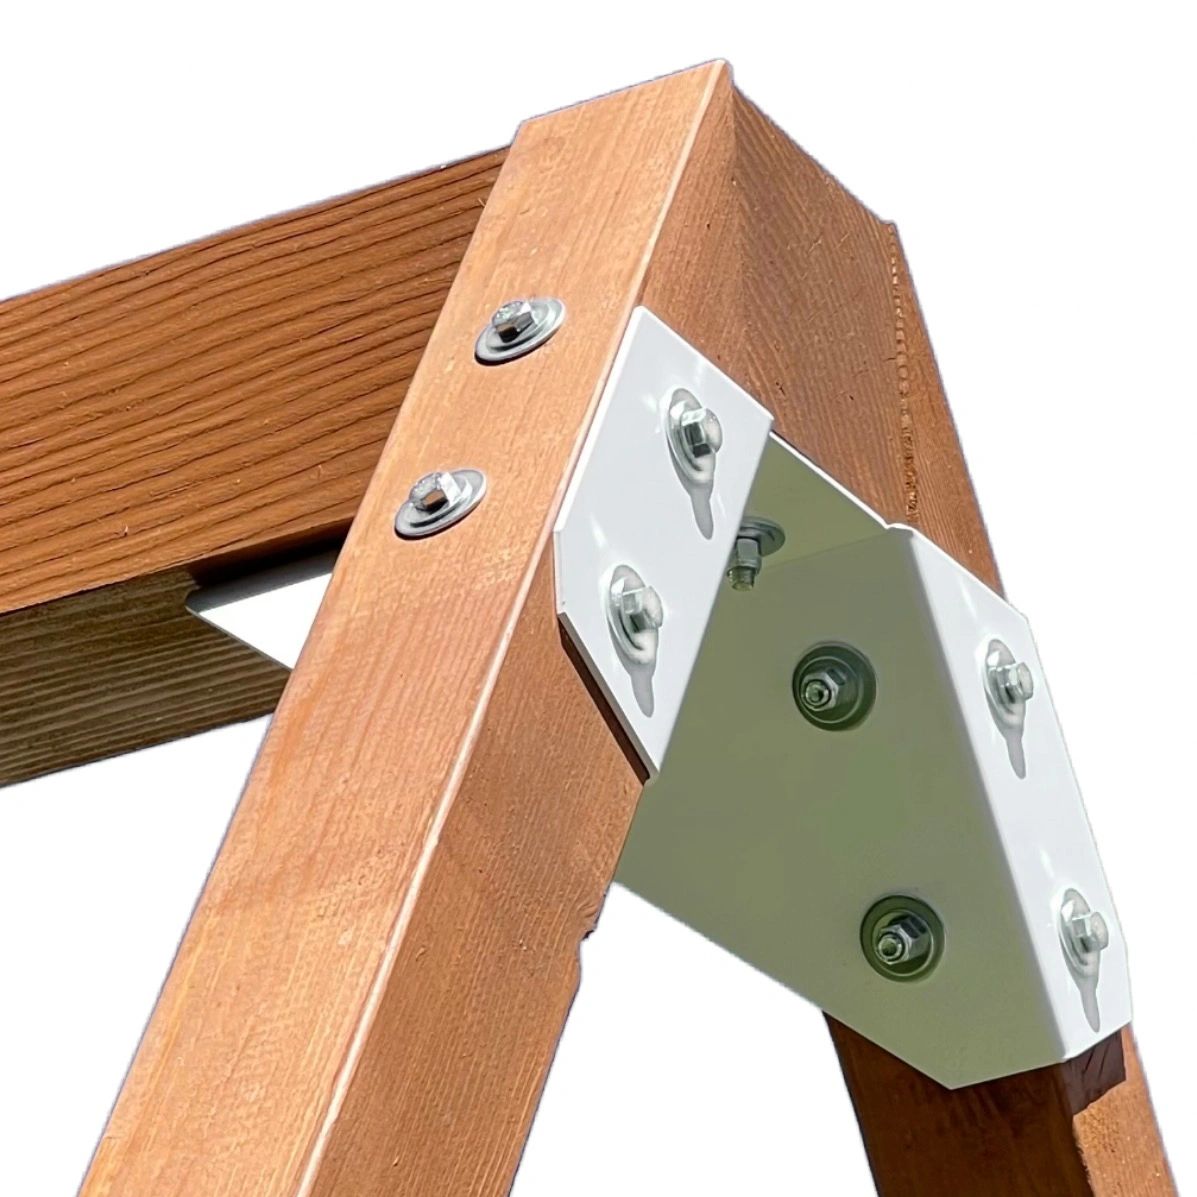 ONE Eclipse Swing Bracket - WONDERFUL WHITE. NOW in stock! Ships same day!